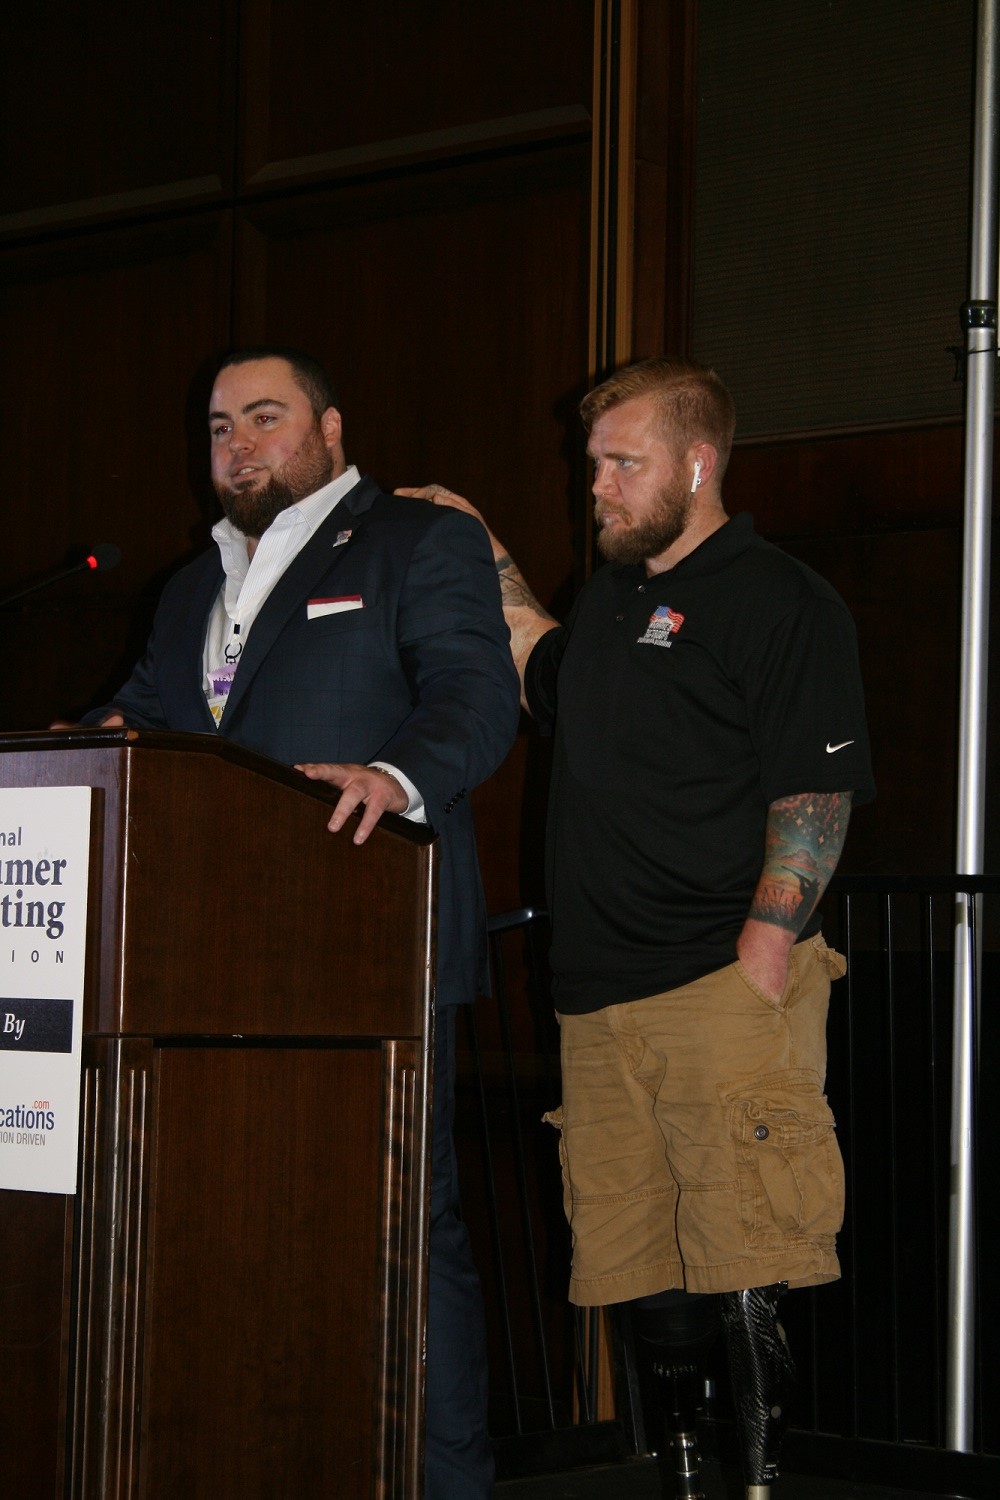 Special Guests Marine Corporal Tony Mullis and Ben MacDonald detail the Homes for Our Troops (HFOT) fundraiser program